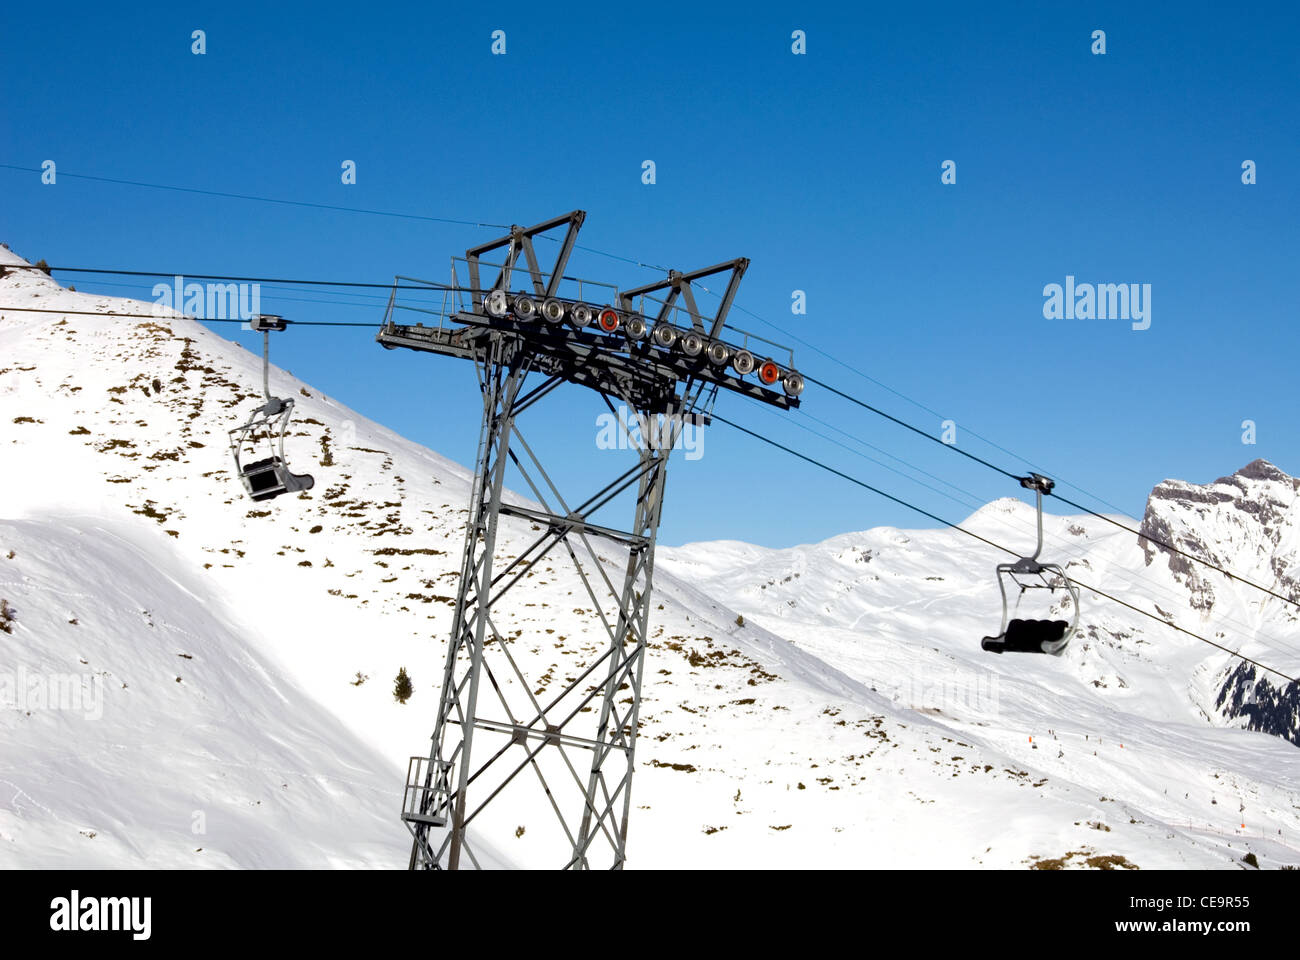 A stanchion supporting the pulley mechanism for a chairlift in a Swiss ski resort Stock Photo